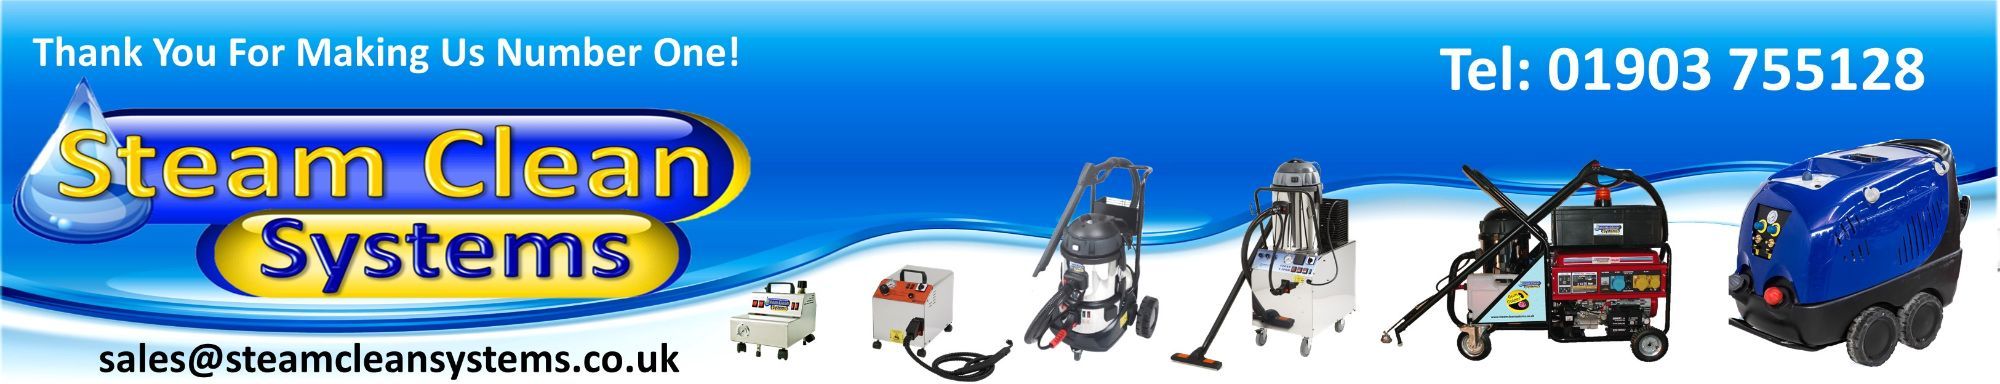 Commercial & Industrial Powerfull Self Descaling Steam Cleaners